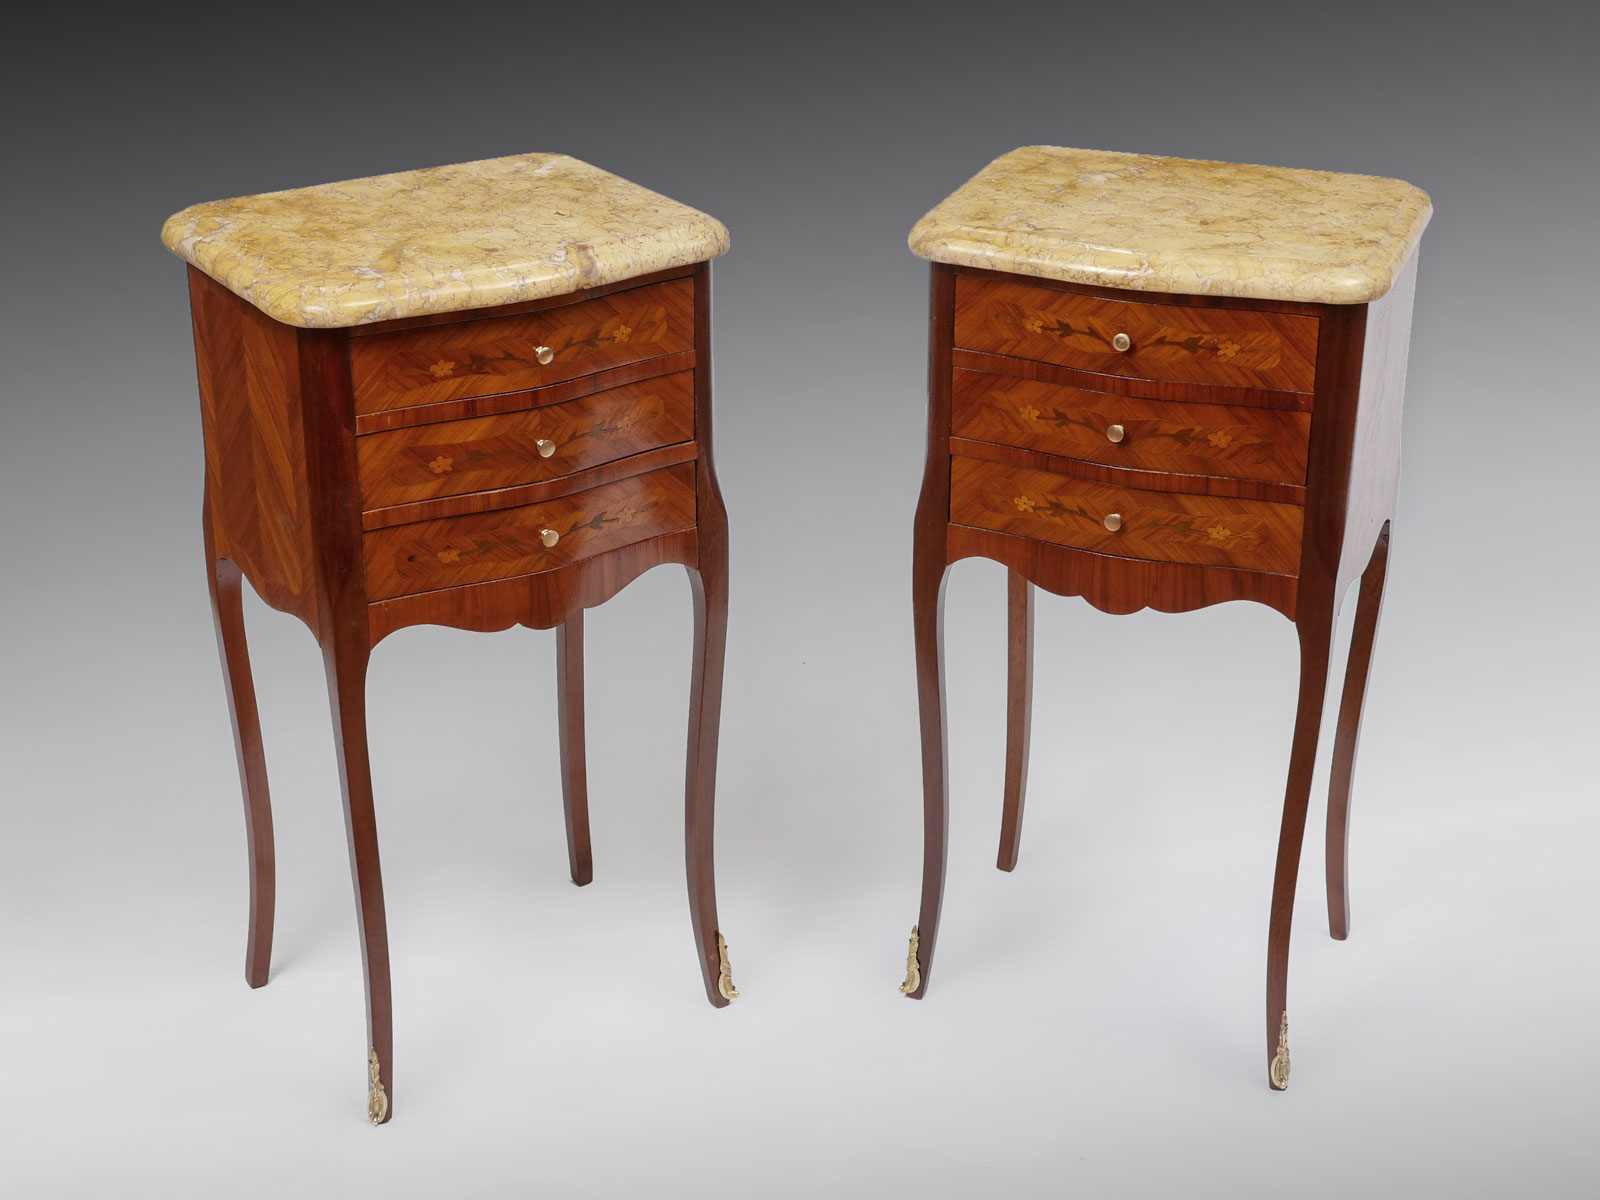 PAIR OF 3 DRAWER MARBLE TOP MARQUETRY